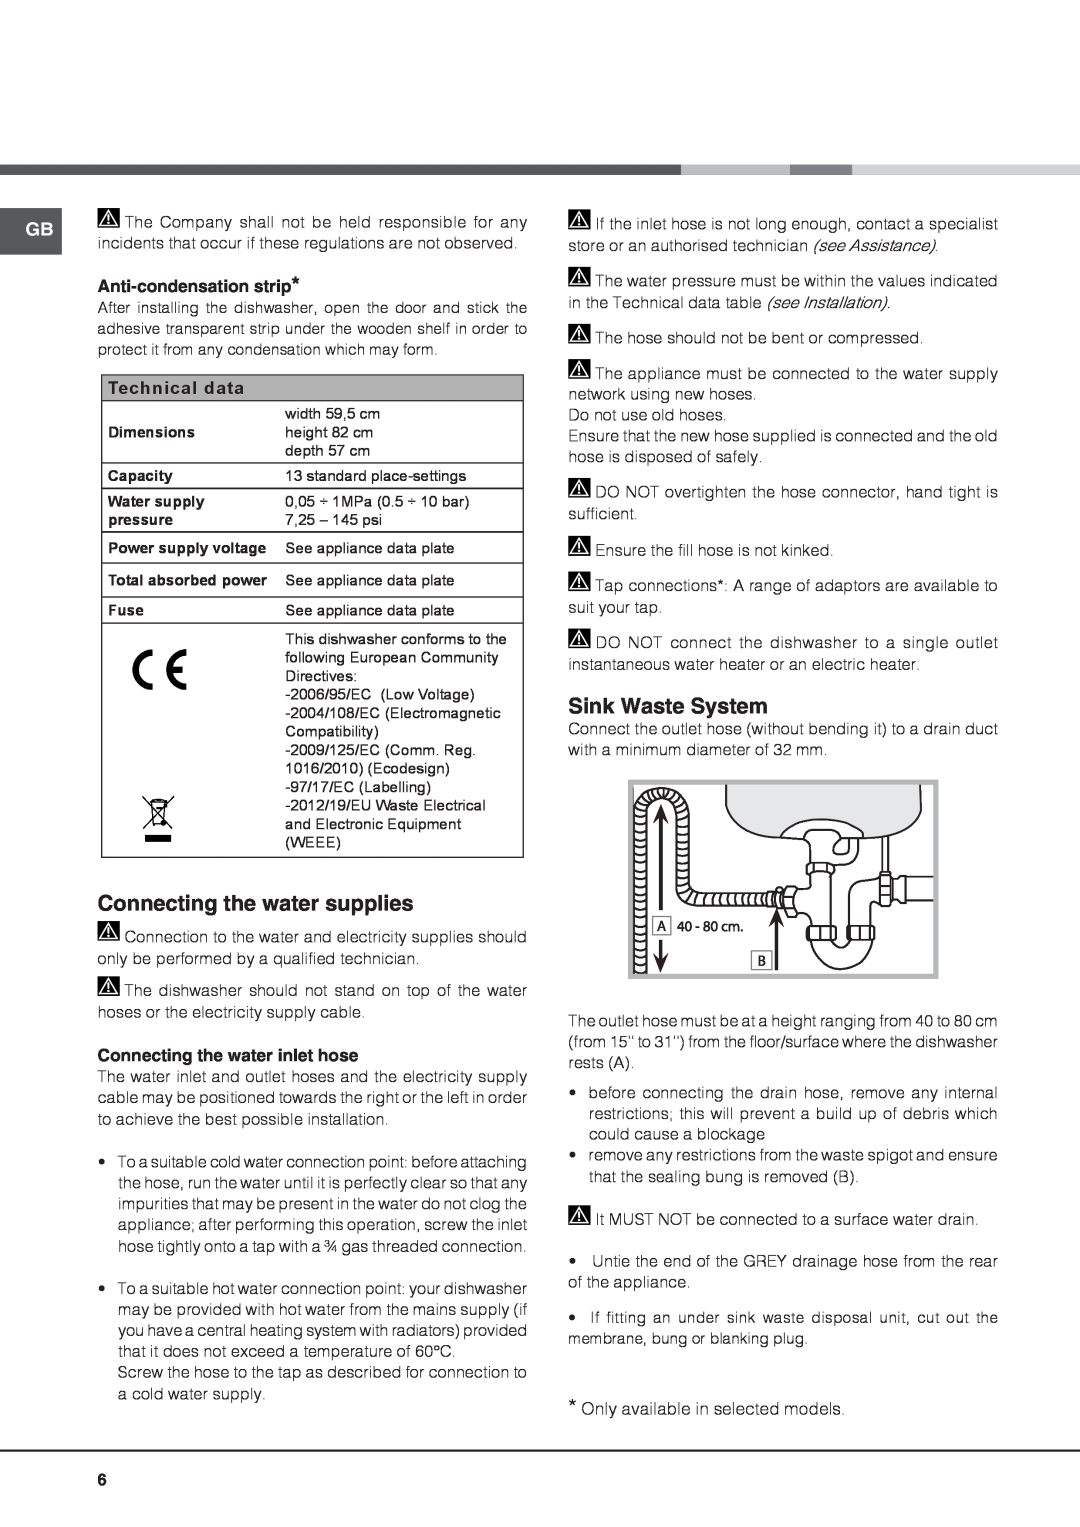 Hotpoint LTB 4B019 manual Connecting the water supplies, Sink Waste System, Anti-condensation strip, Technical data 